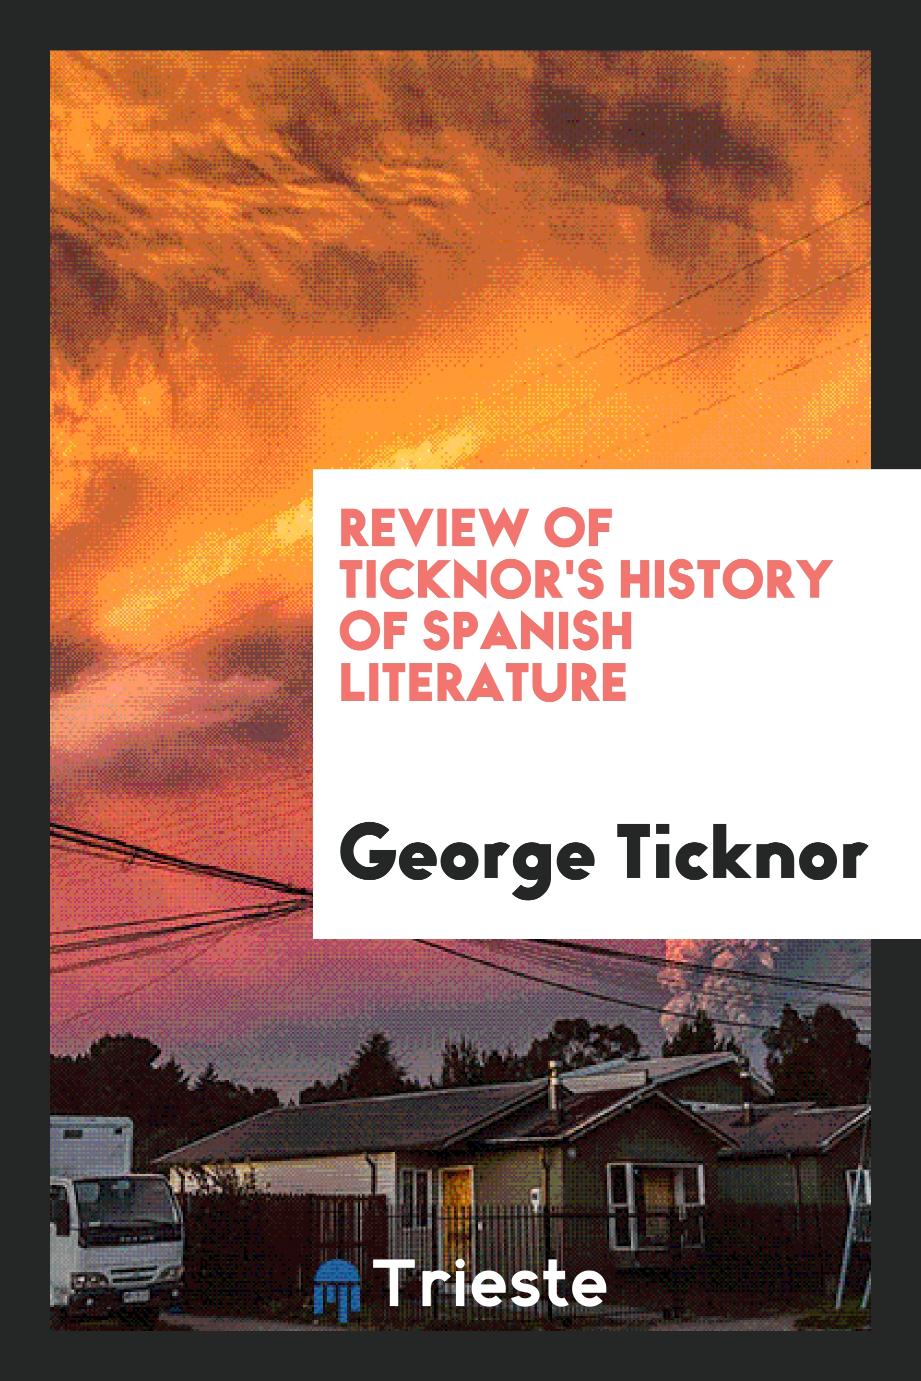 Review of Ticknor's History of Spanish Literature